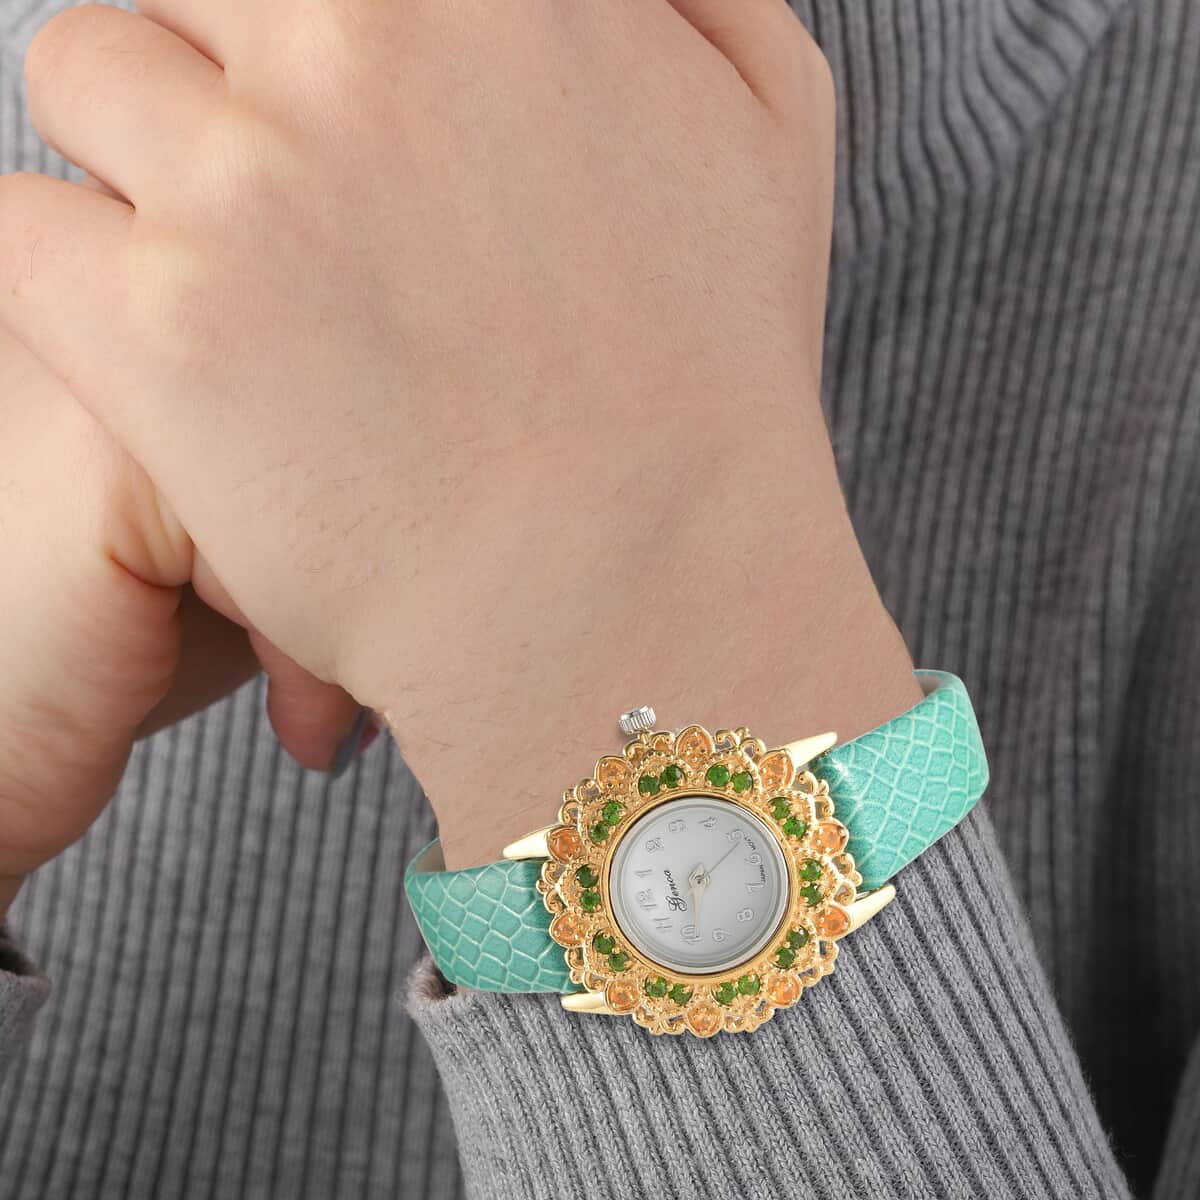 GENOA Jalisco Fire Opal, Natural Chrome Diopside Miyota Japanese Movement Watch in ION Plated 18K YG and Stainless Steel with Genuine Leather Strap (22mm) 1.25 ctw image number 2